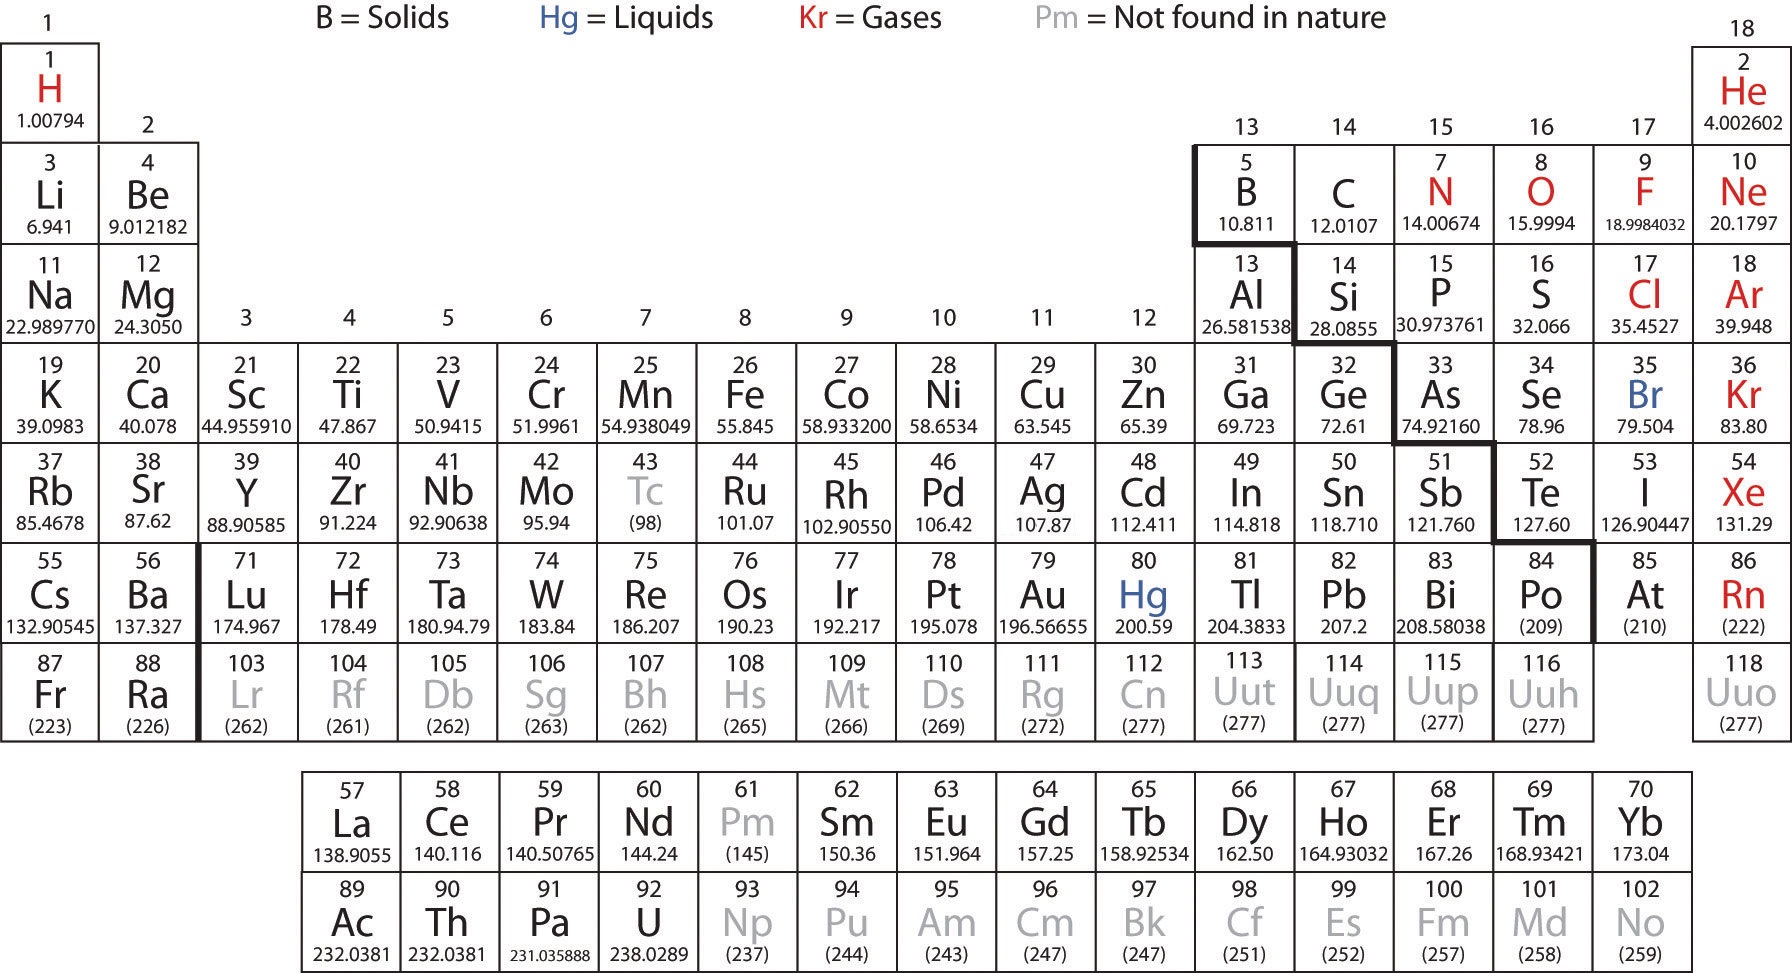 A Modern Periodic Table. A modern periodic table lists elements left to right by atomic number.